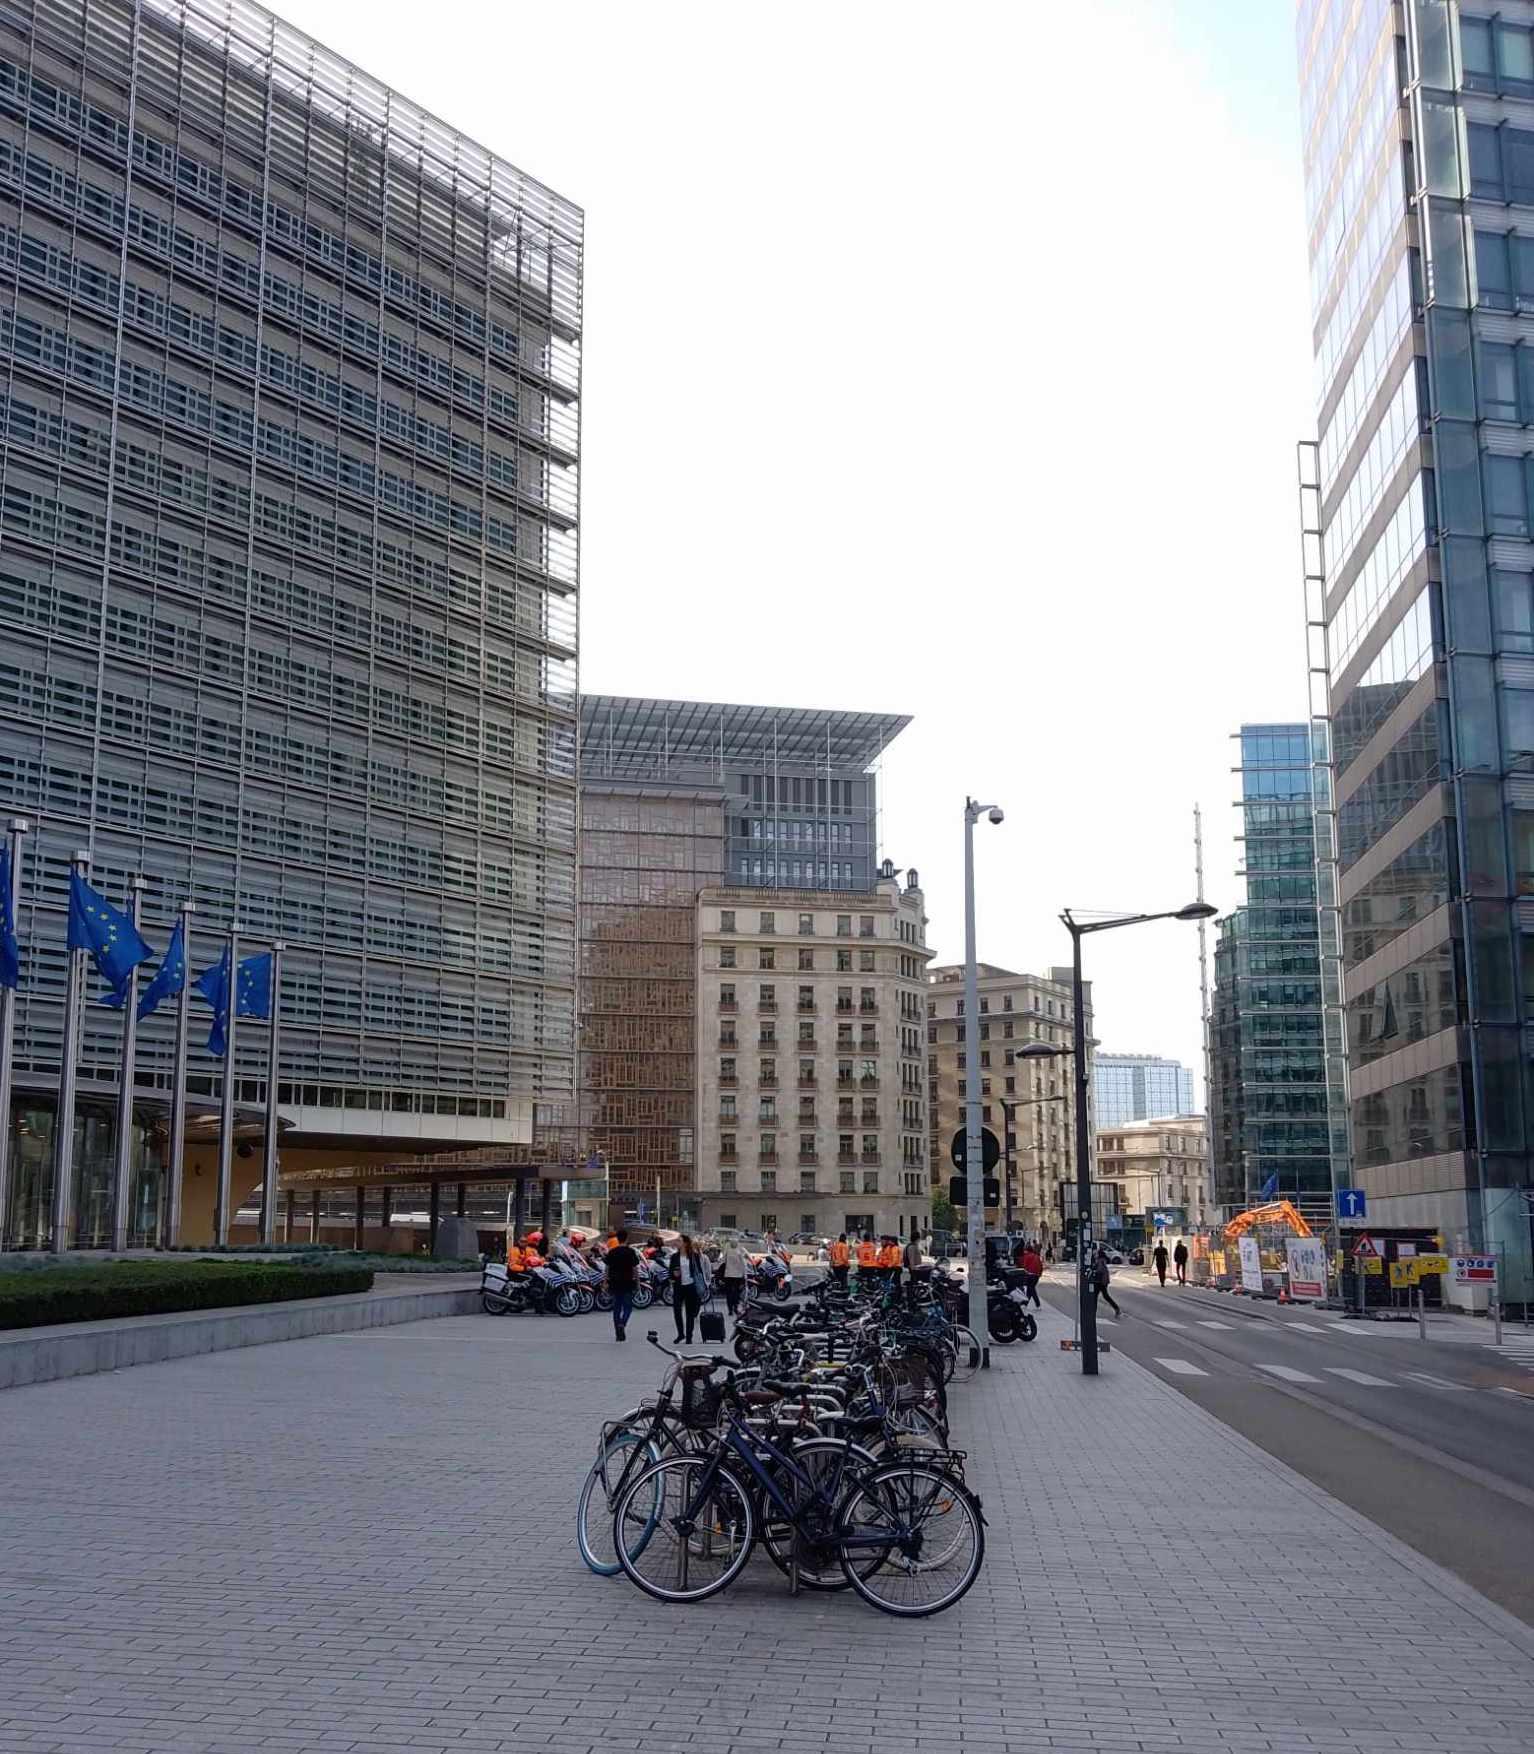 European Commission HQ on the left, Council of the EU in the background, and Charlemagne to the right